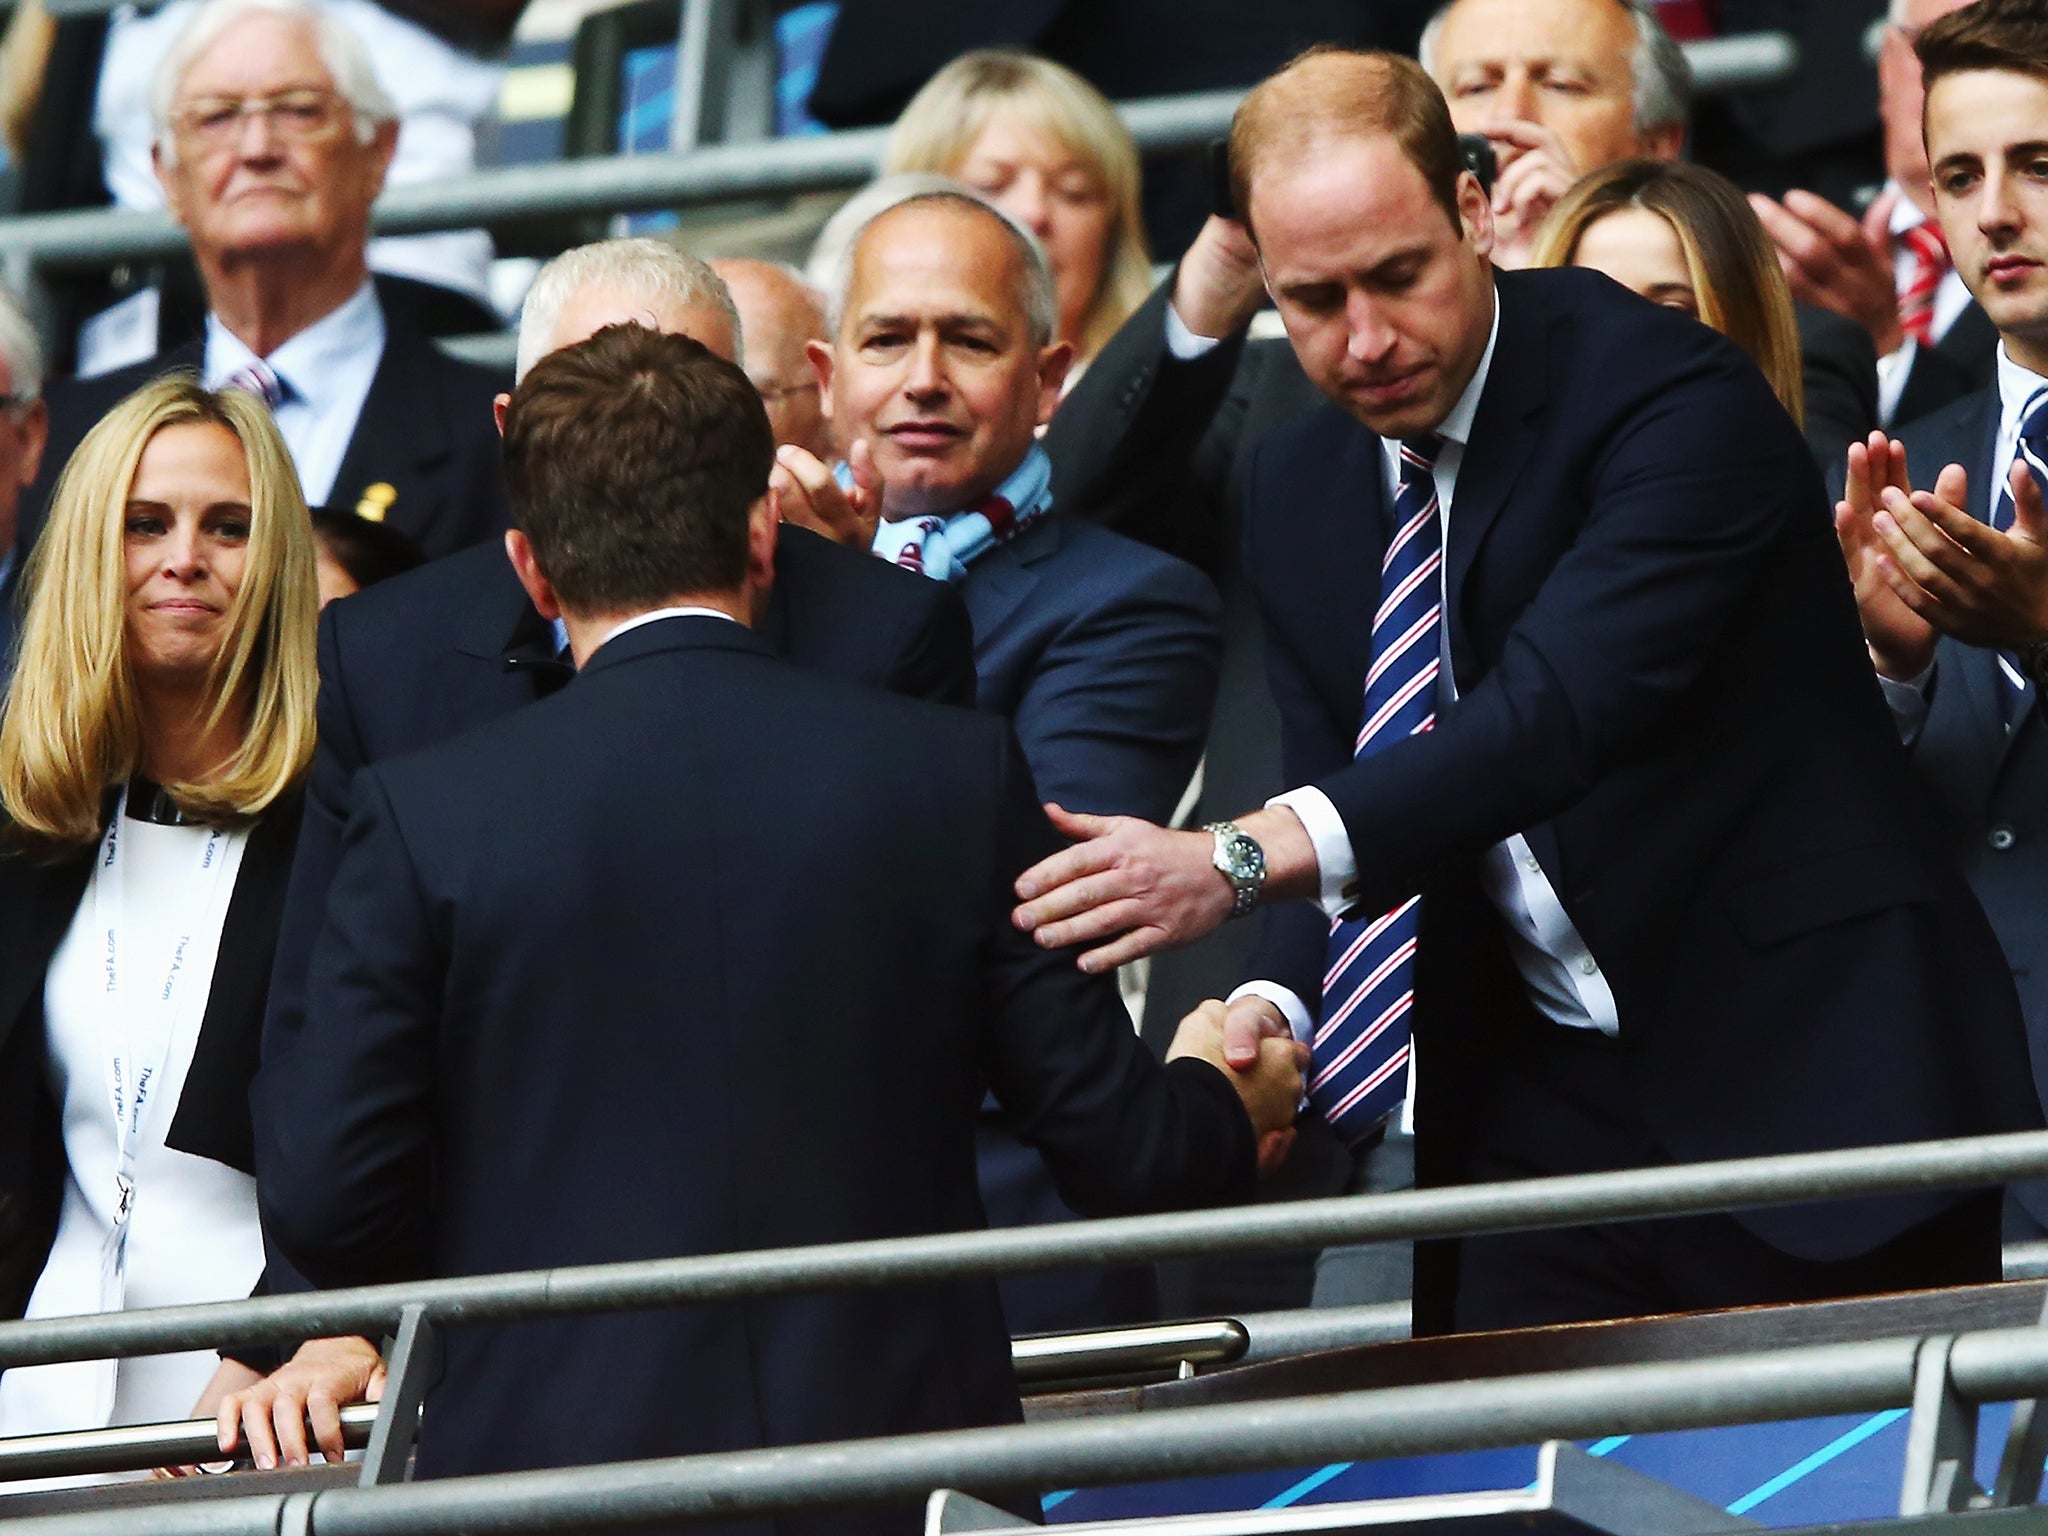 Prince William shakes hands with Tim Sherwood